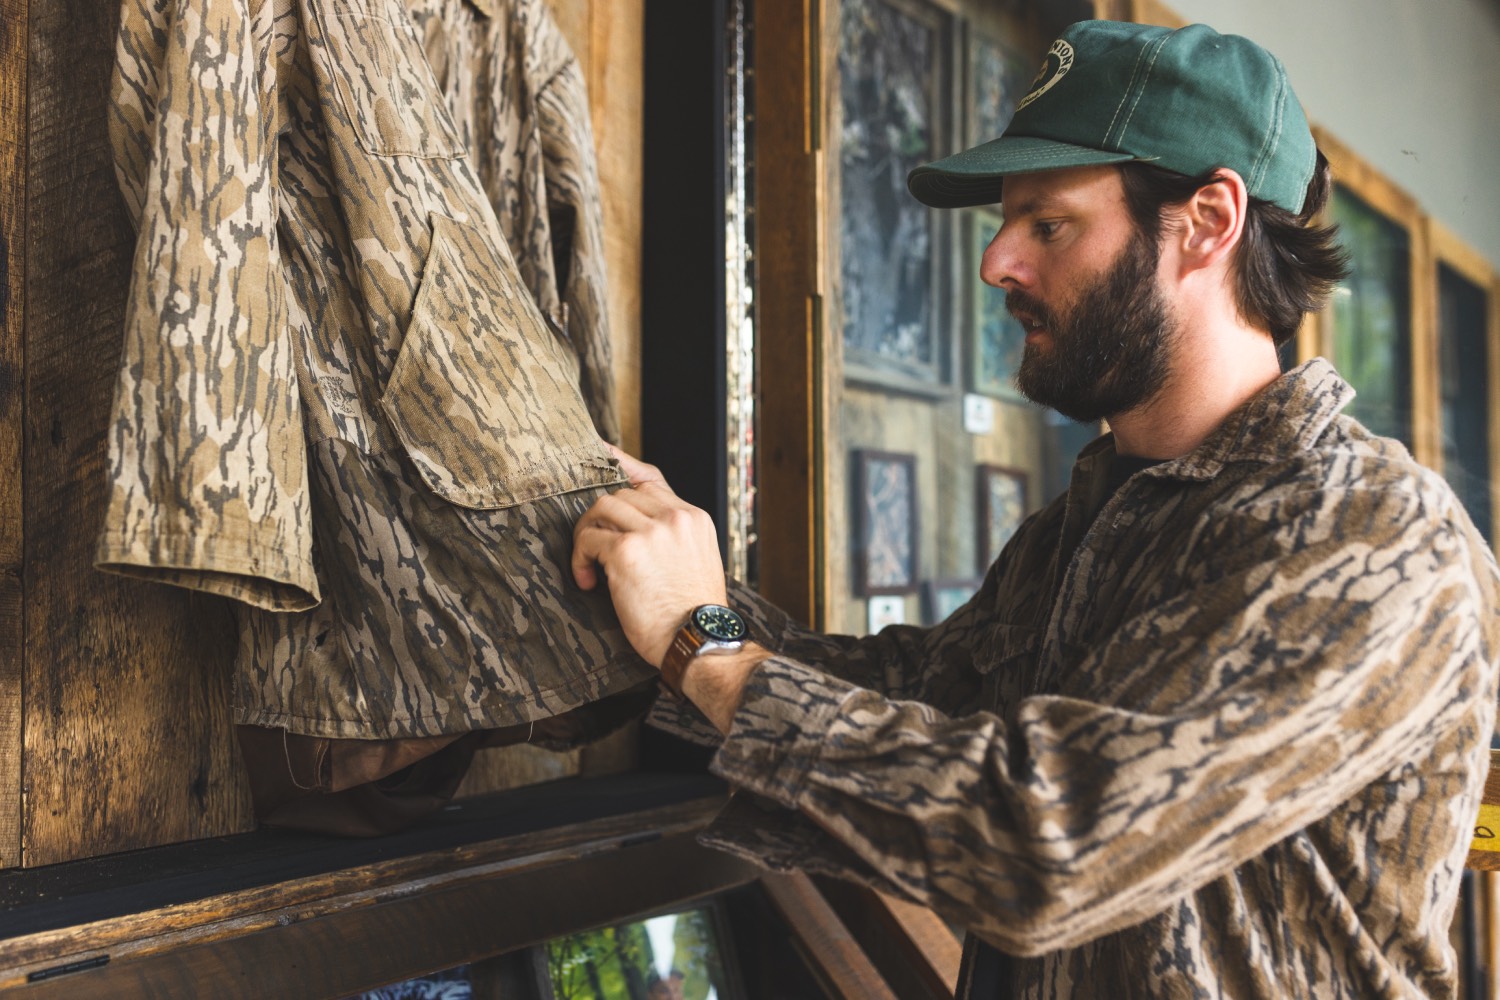 Daniel Haas takes a look at one of the old mossy oak jackets